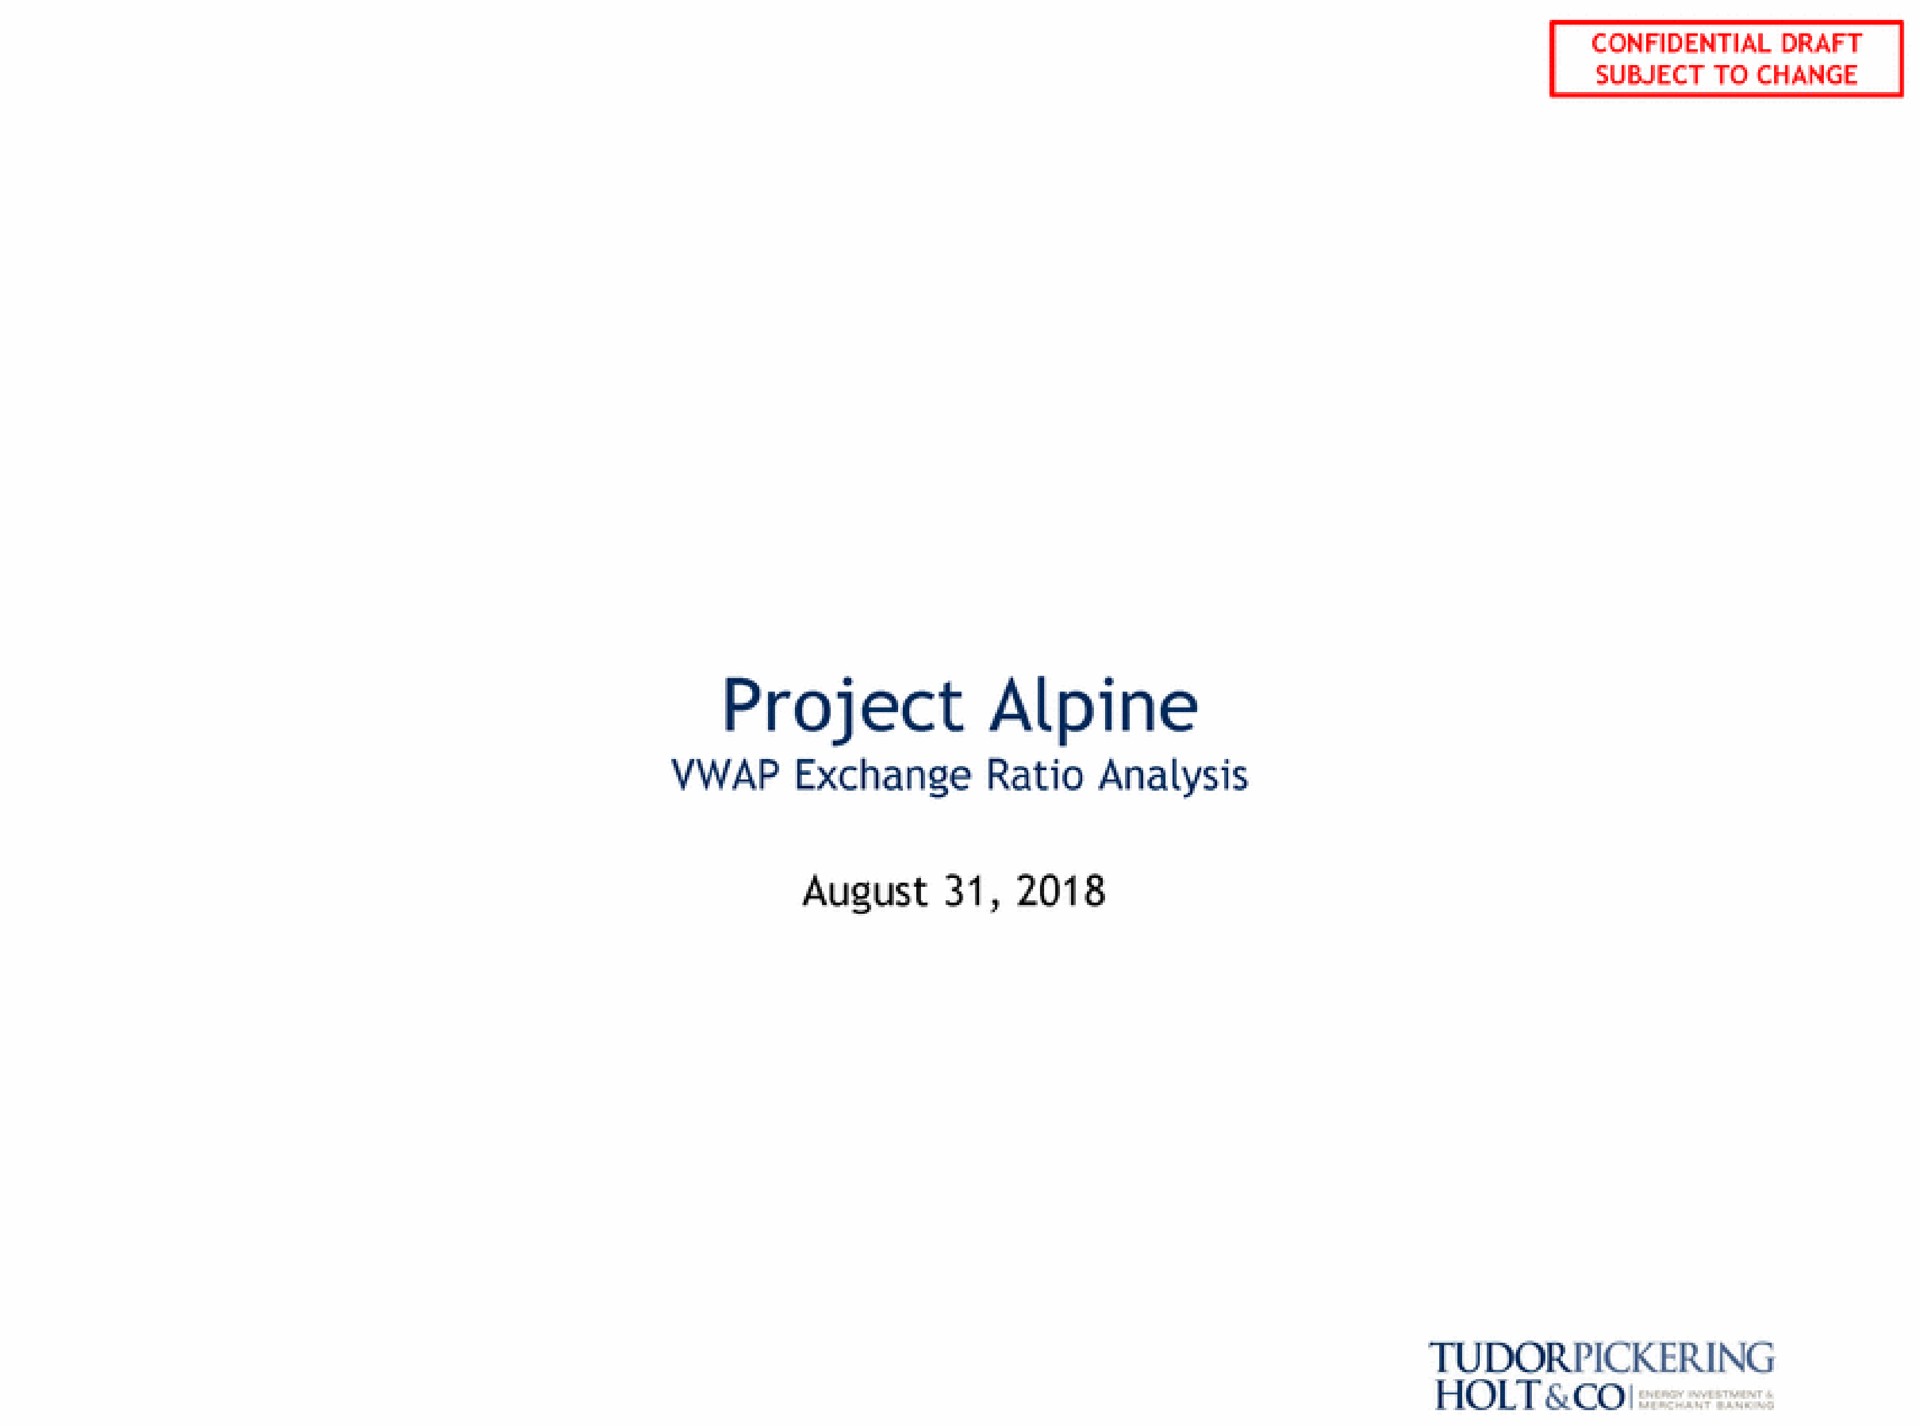 project alpine exchange ratio analysis august holt coo | Tudor, Pickering, Holt & Co